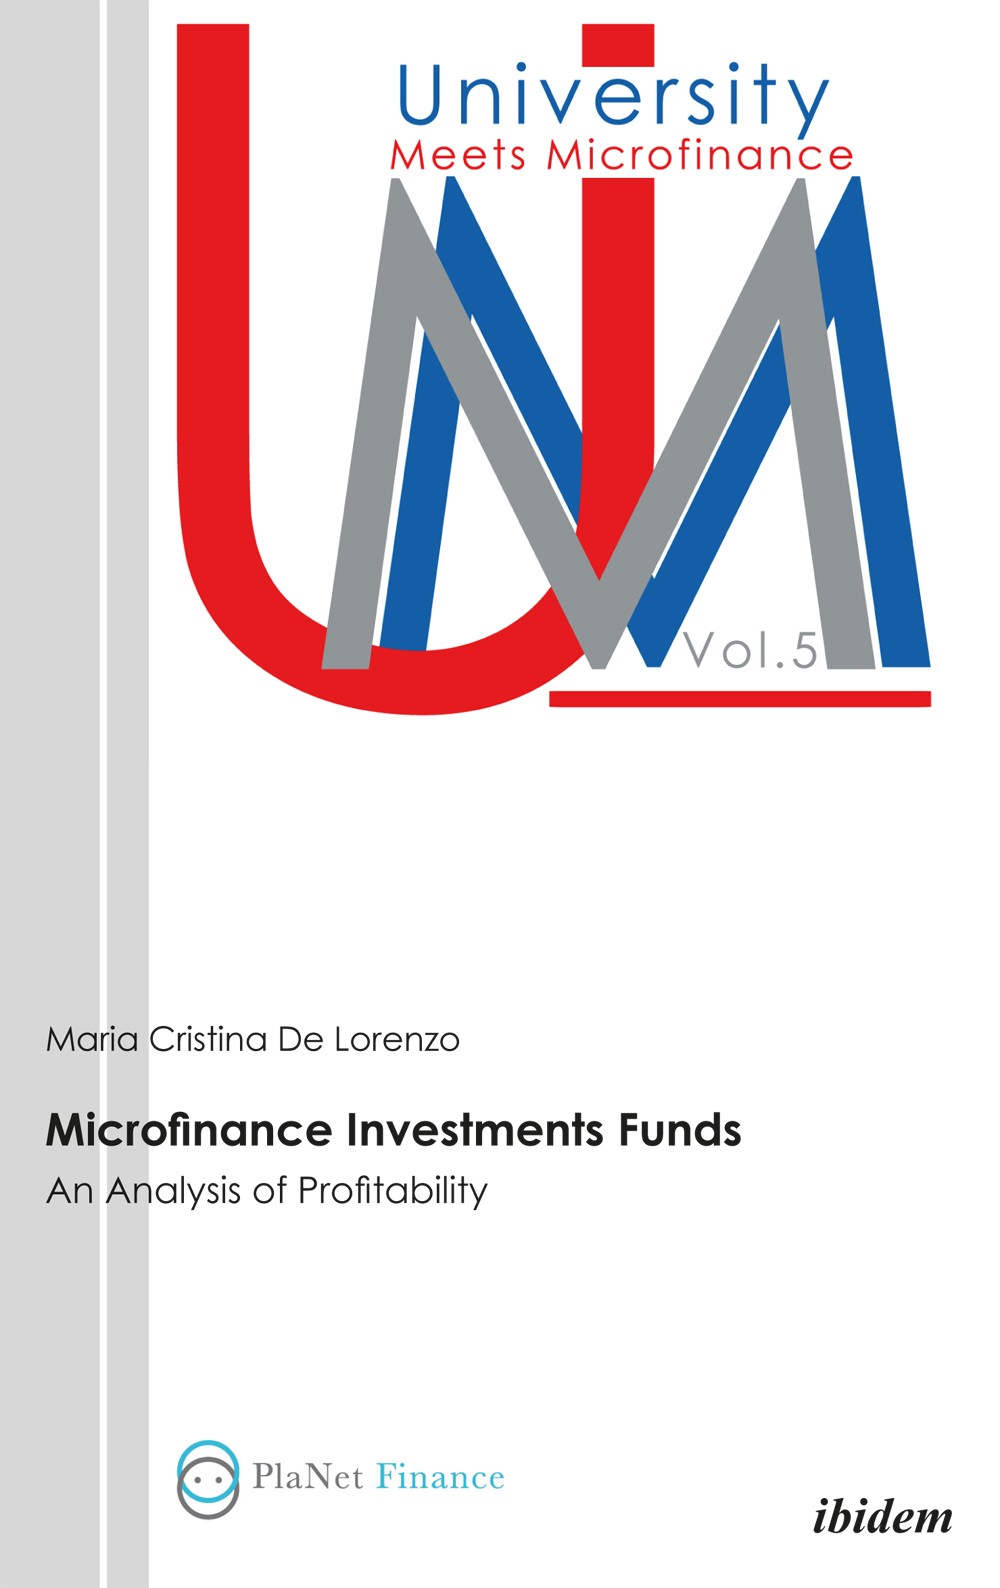 Microfinance Investment Funds: An analysis of profitability